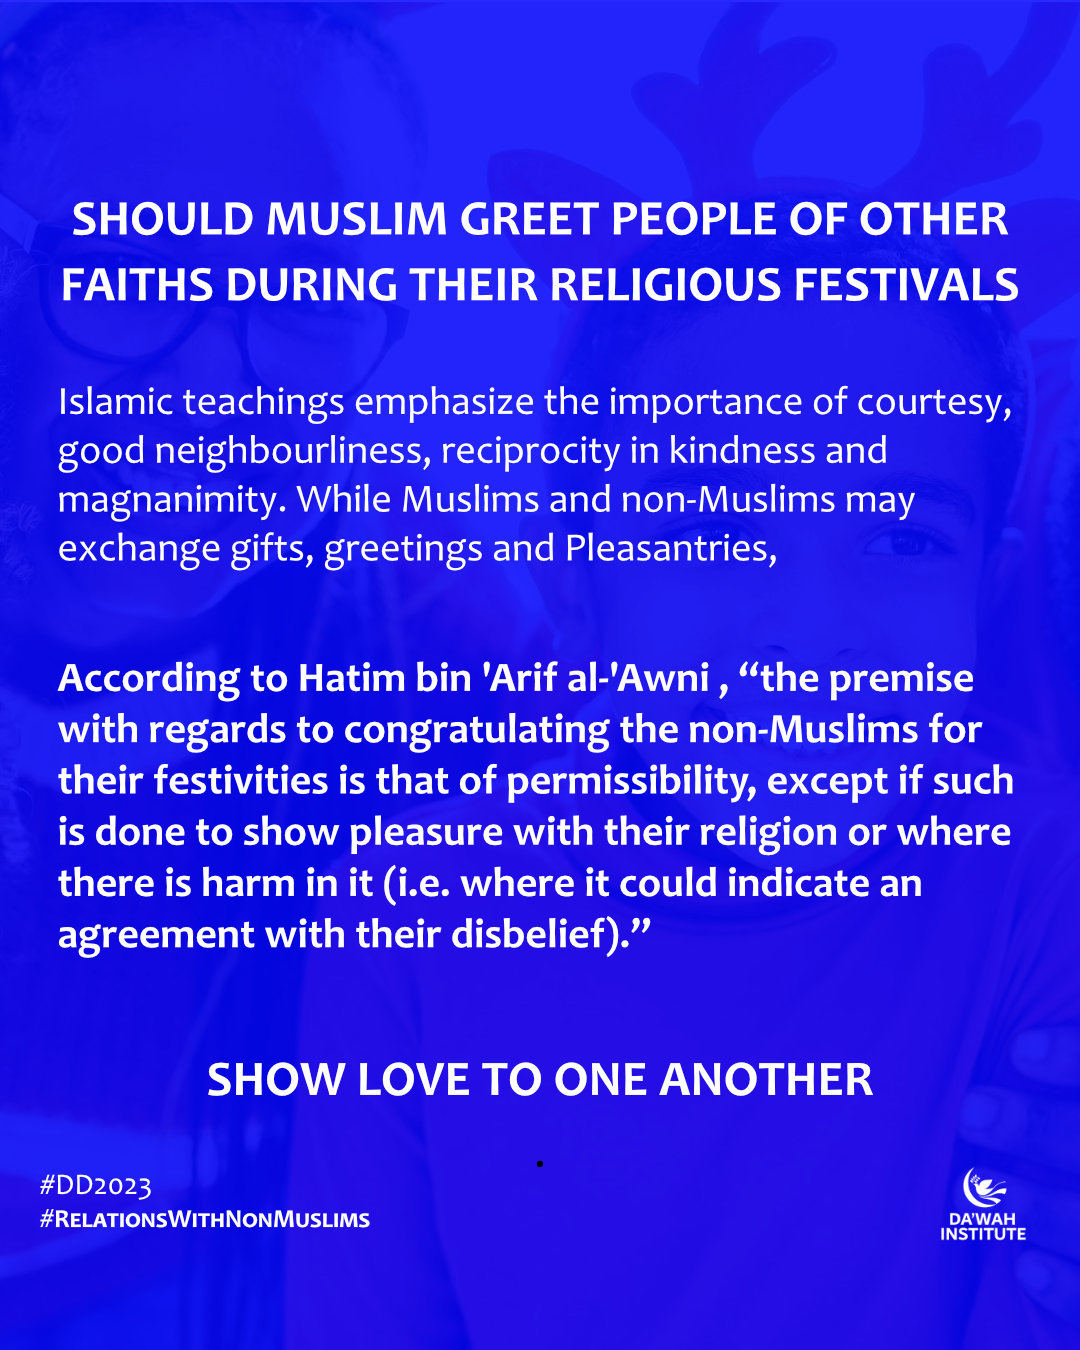 SHOULD MUSLIM GREET PEOPLE OF OTHER FAITHS DURING THEIR RELIGIOUS FESTIVALS